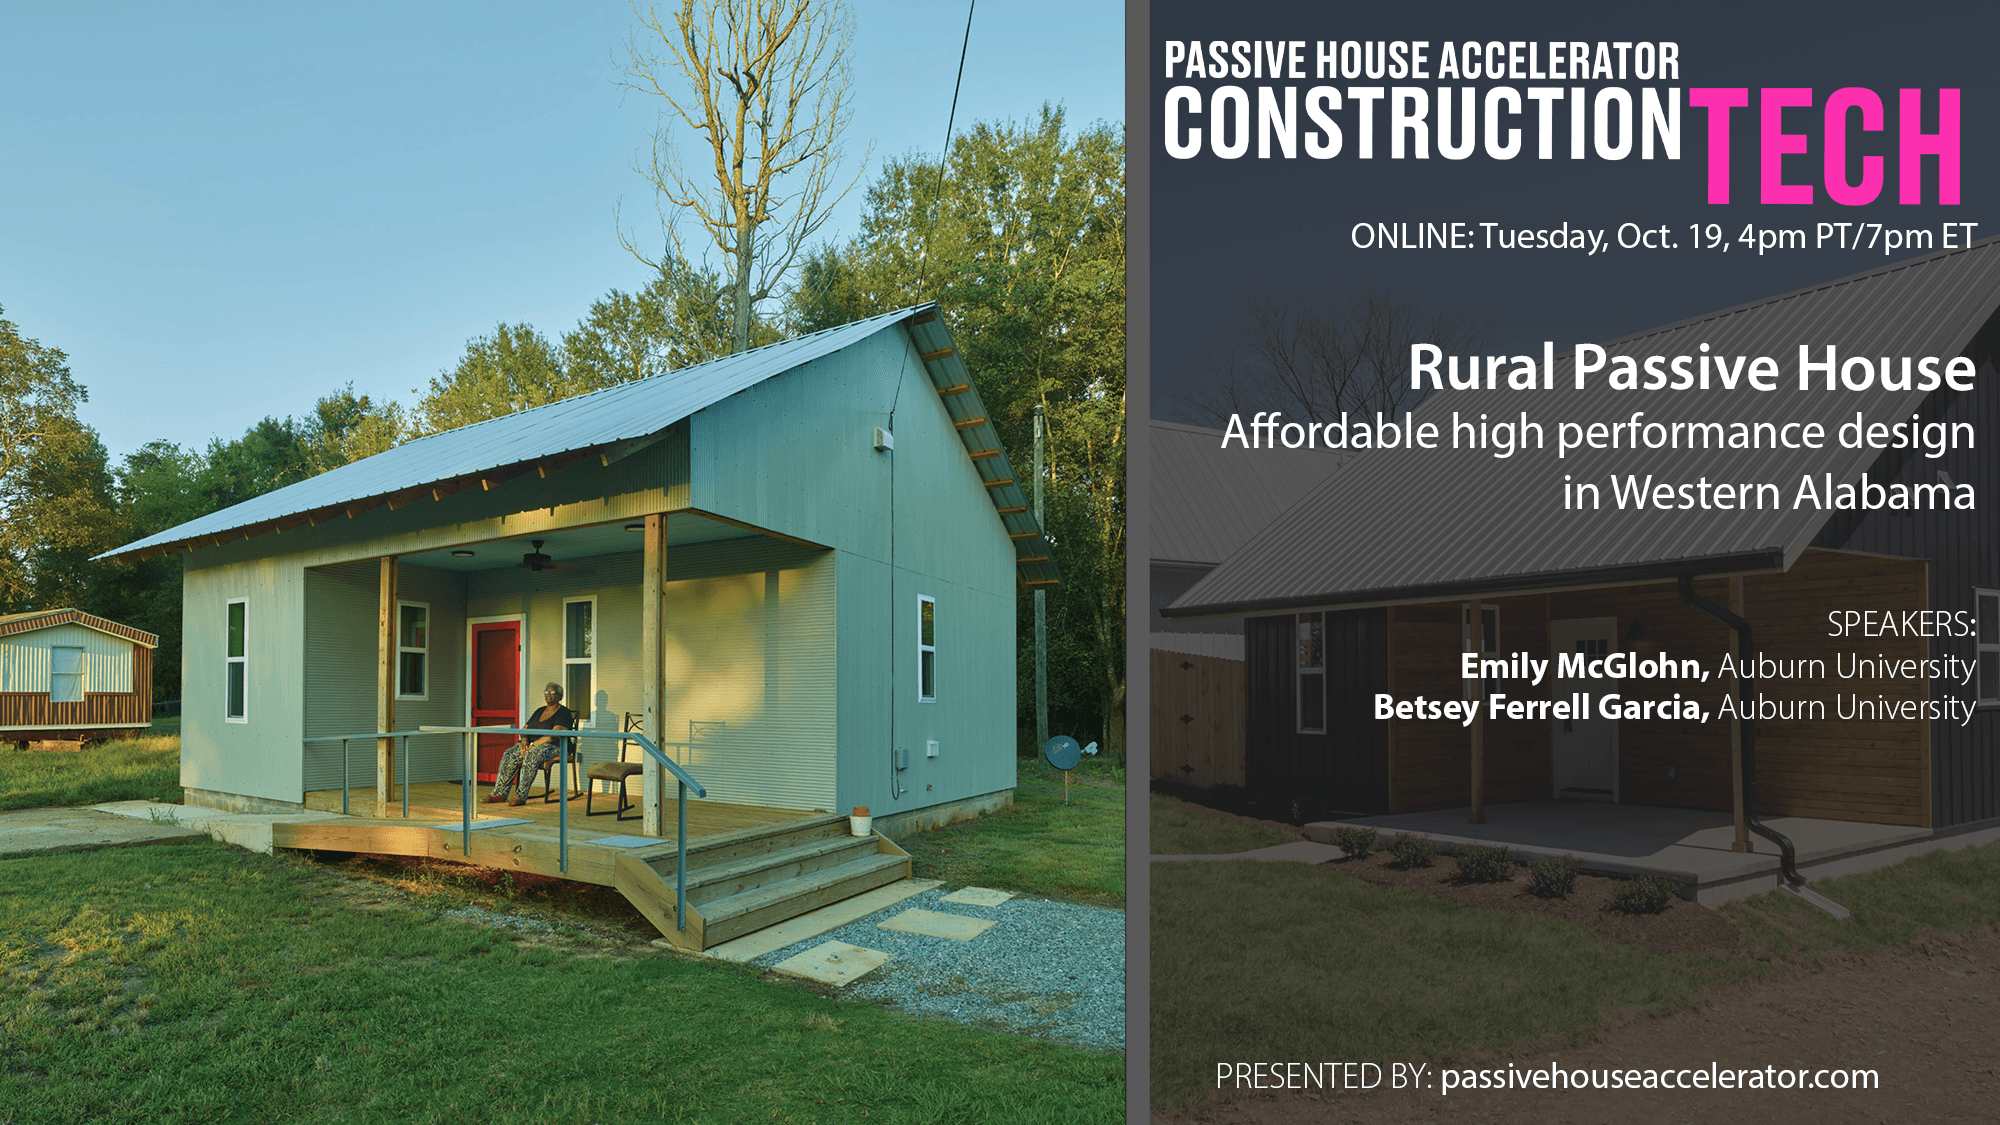 Rural Passive House Initiatives in Western Alabama and the Southeast